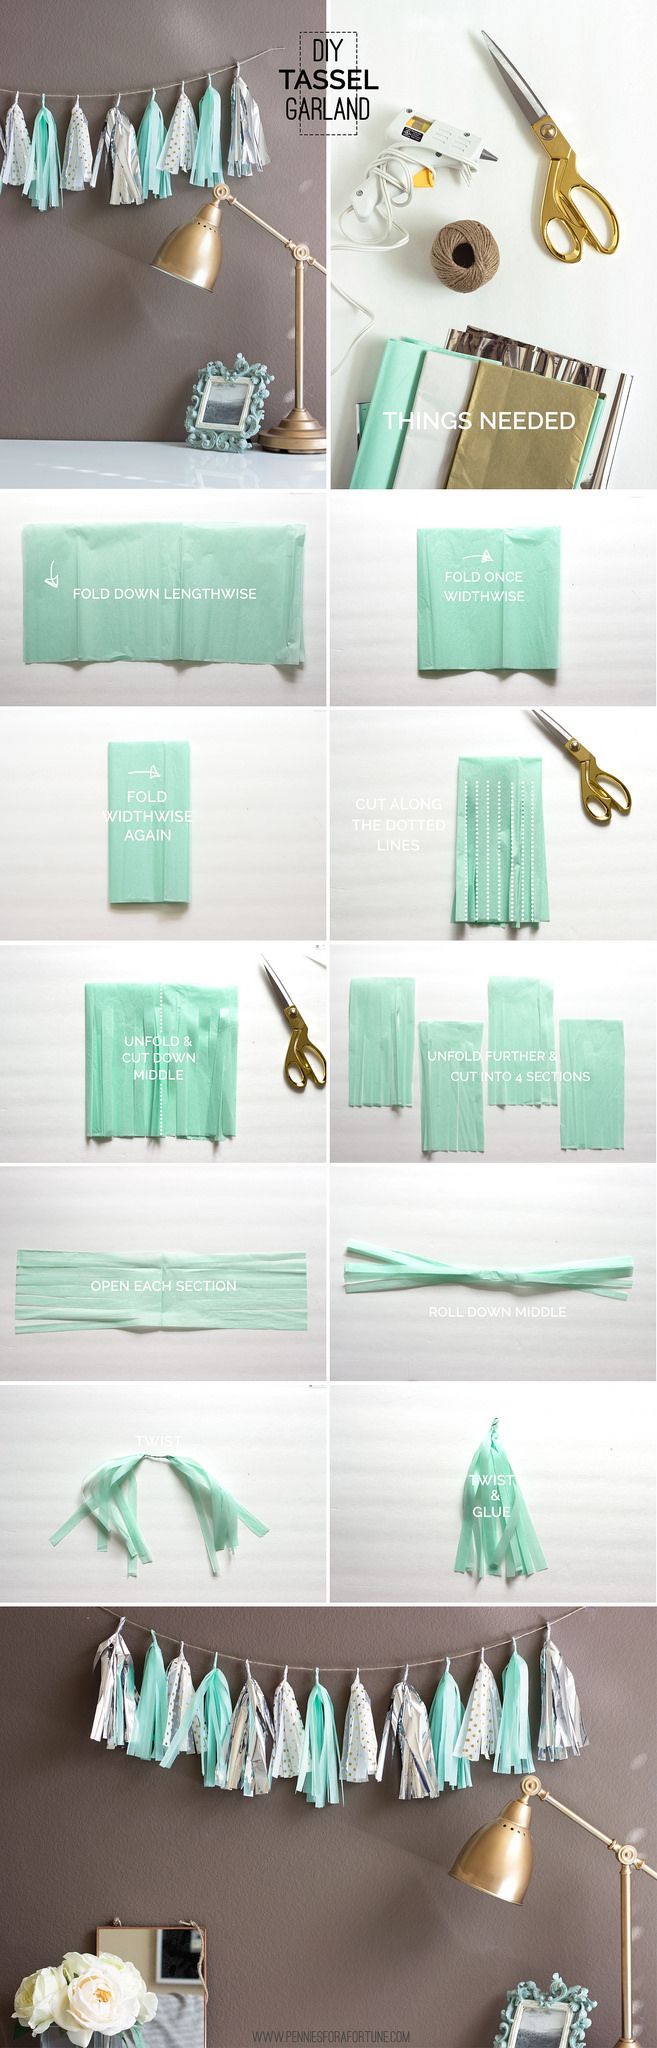 Add some sparkle to your next party with this super easy mint, gold, and silver ta